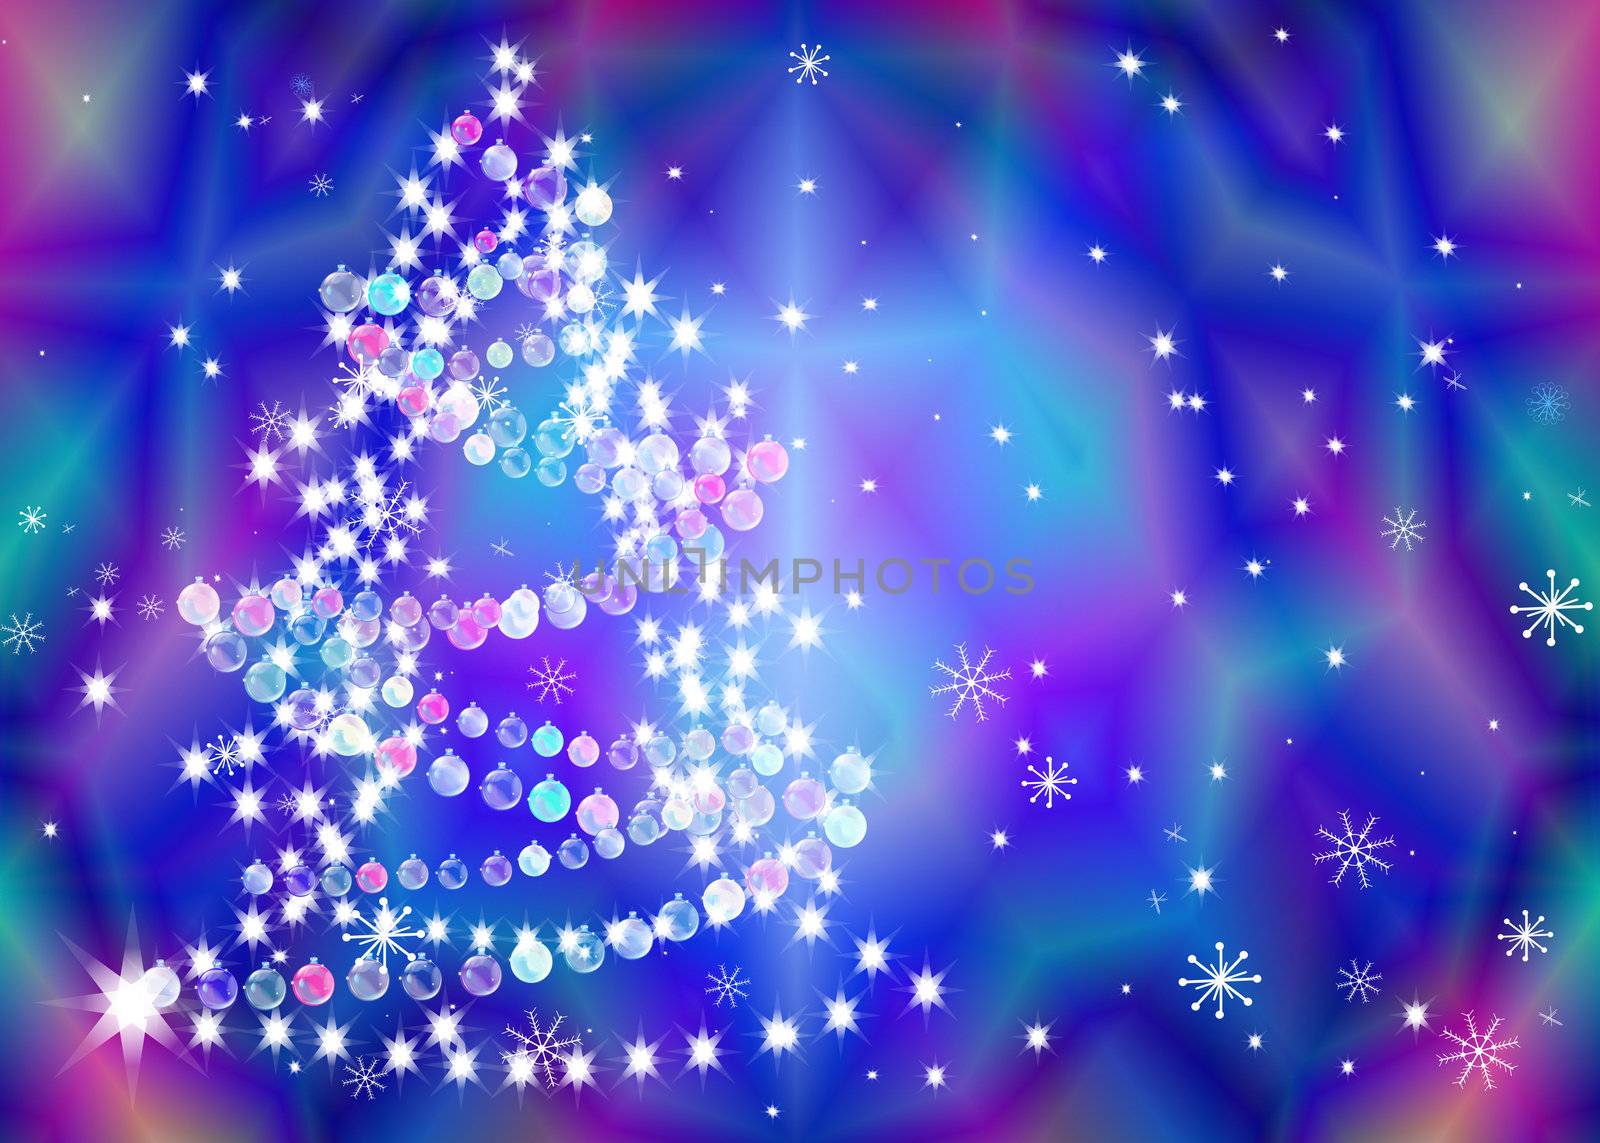 New Year's celebratory fur-tree with a garland on a bright abstract background